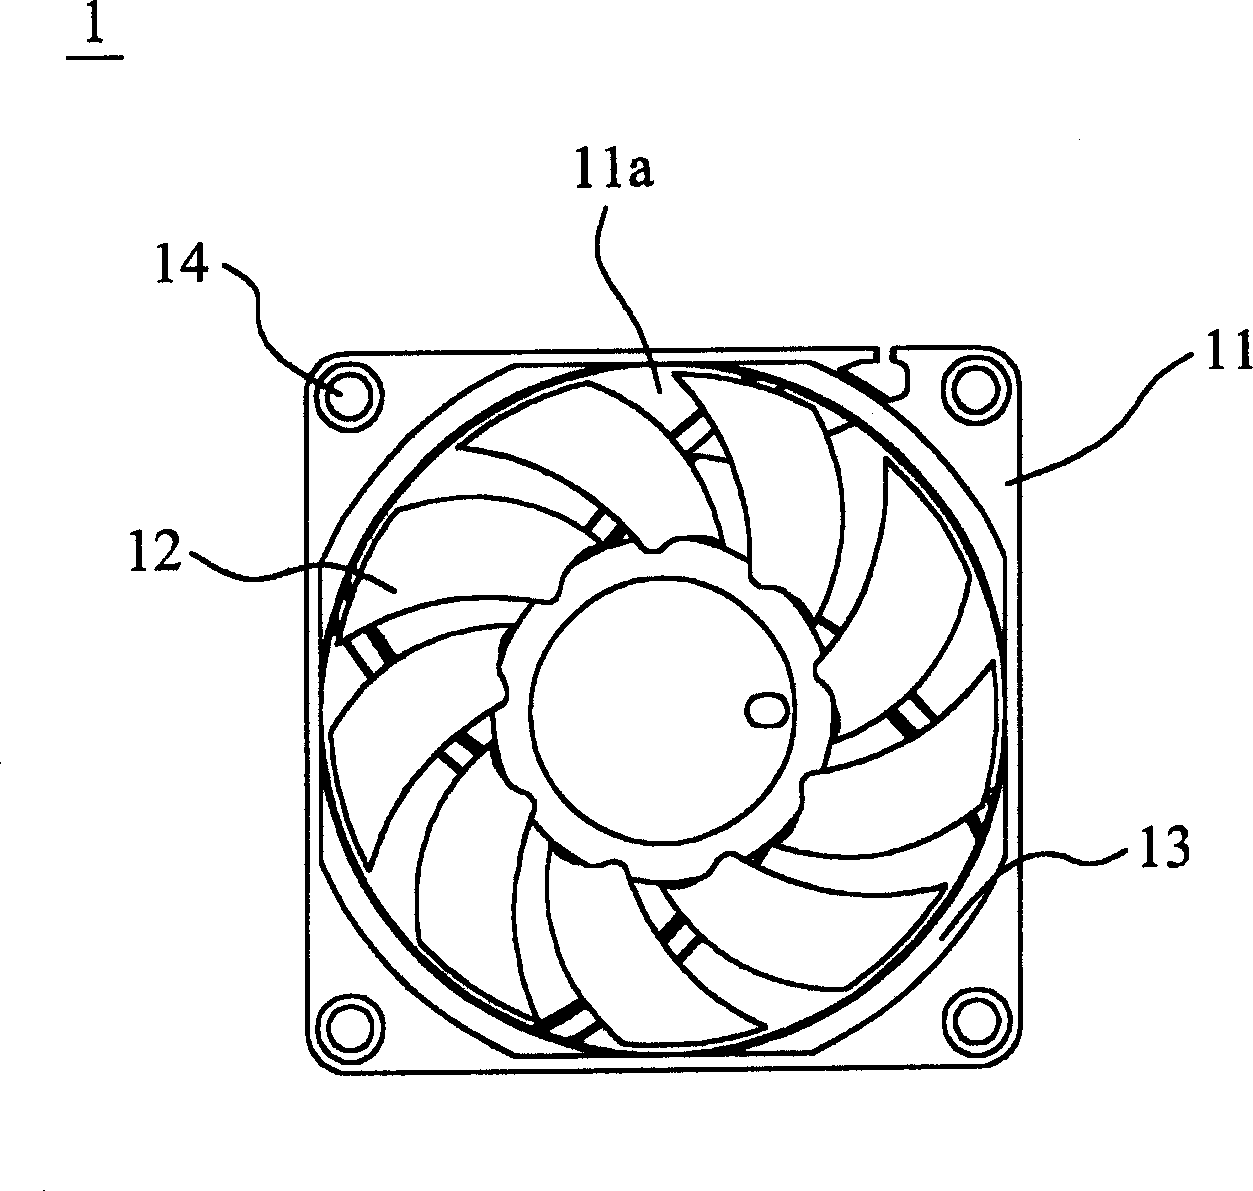 Heat sink and structure of fan frame